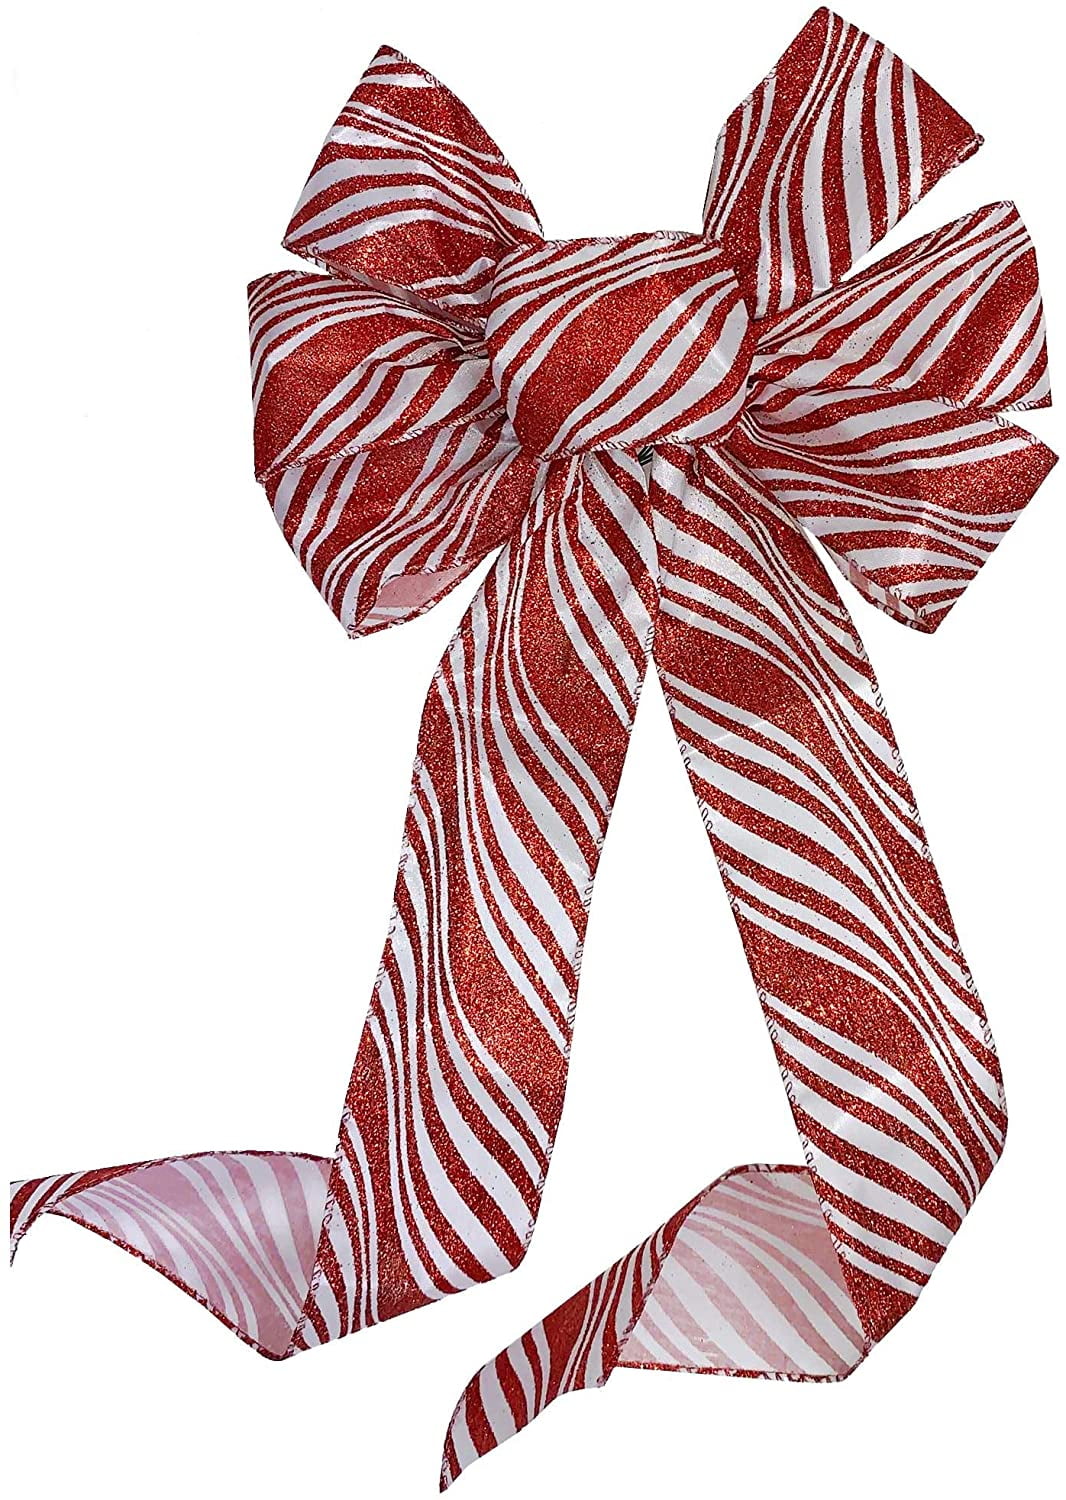 EcoEarth 18 Inch Big Red Birthday Bow, Giant Car Bow / Gift Bow (US Company)